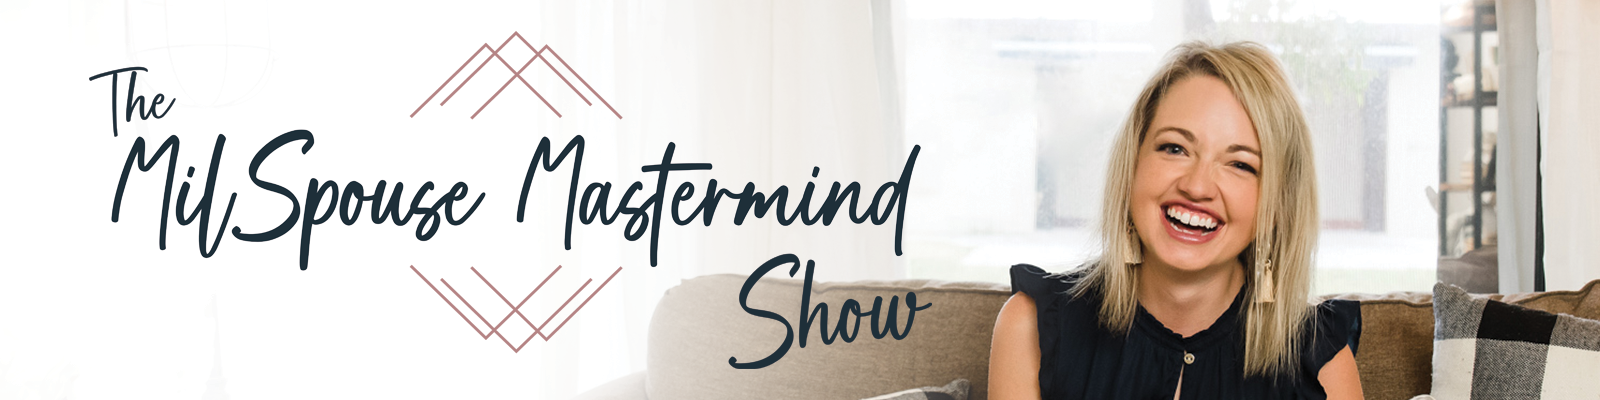 MilSpouse Mastermind Show | Create a life you love & grow a purpose-fueled business as a military spouse